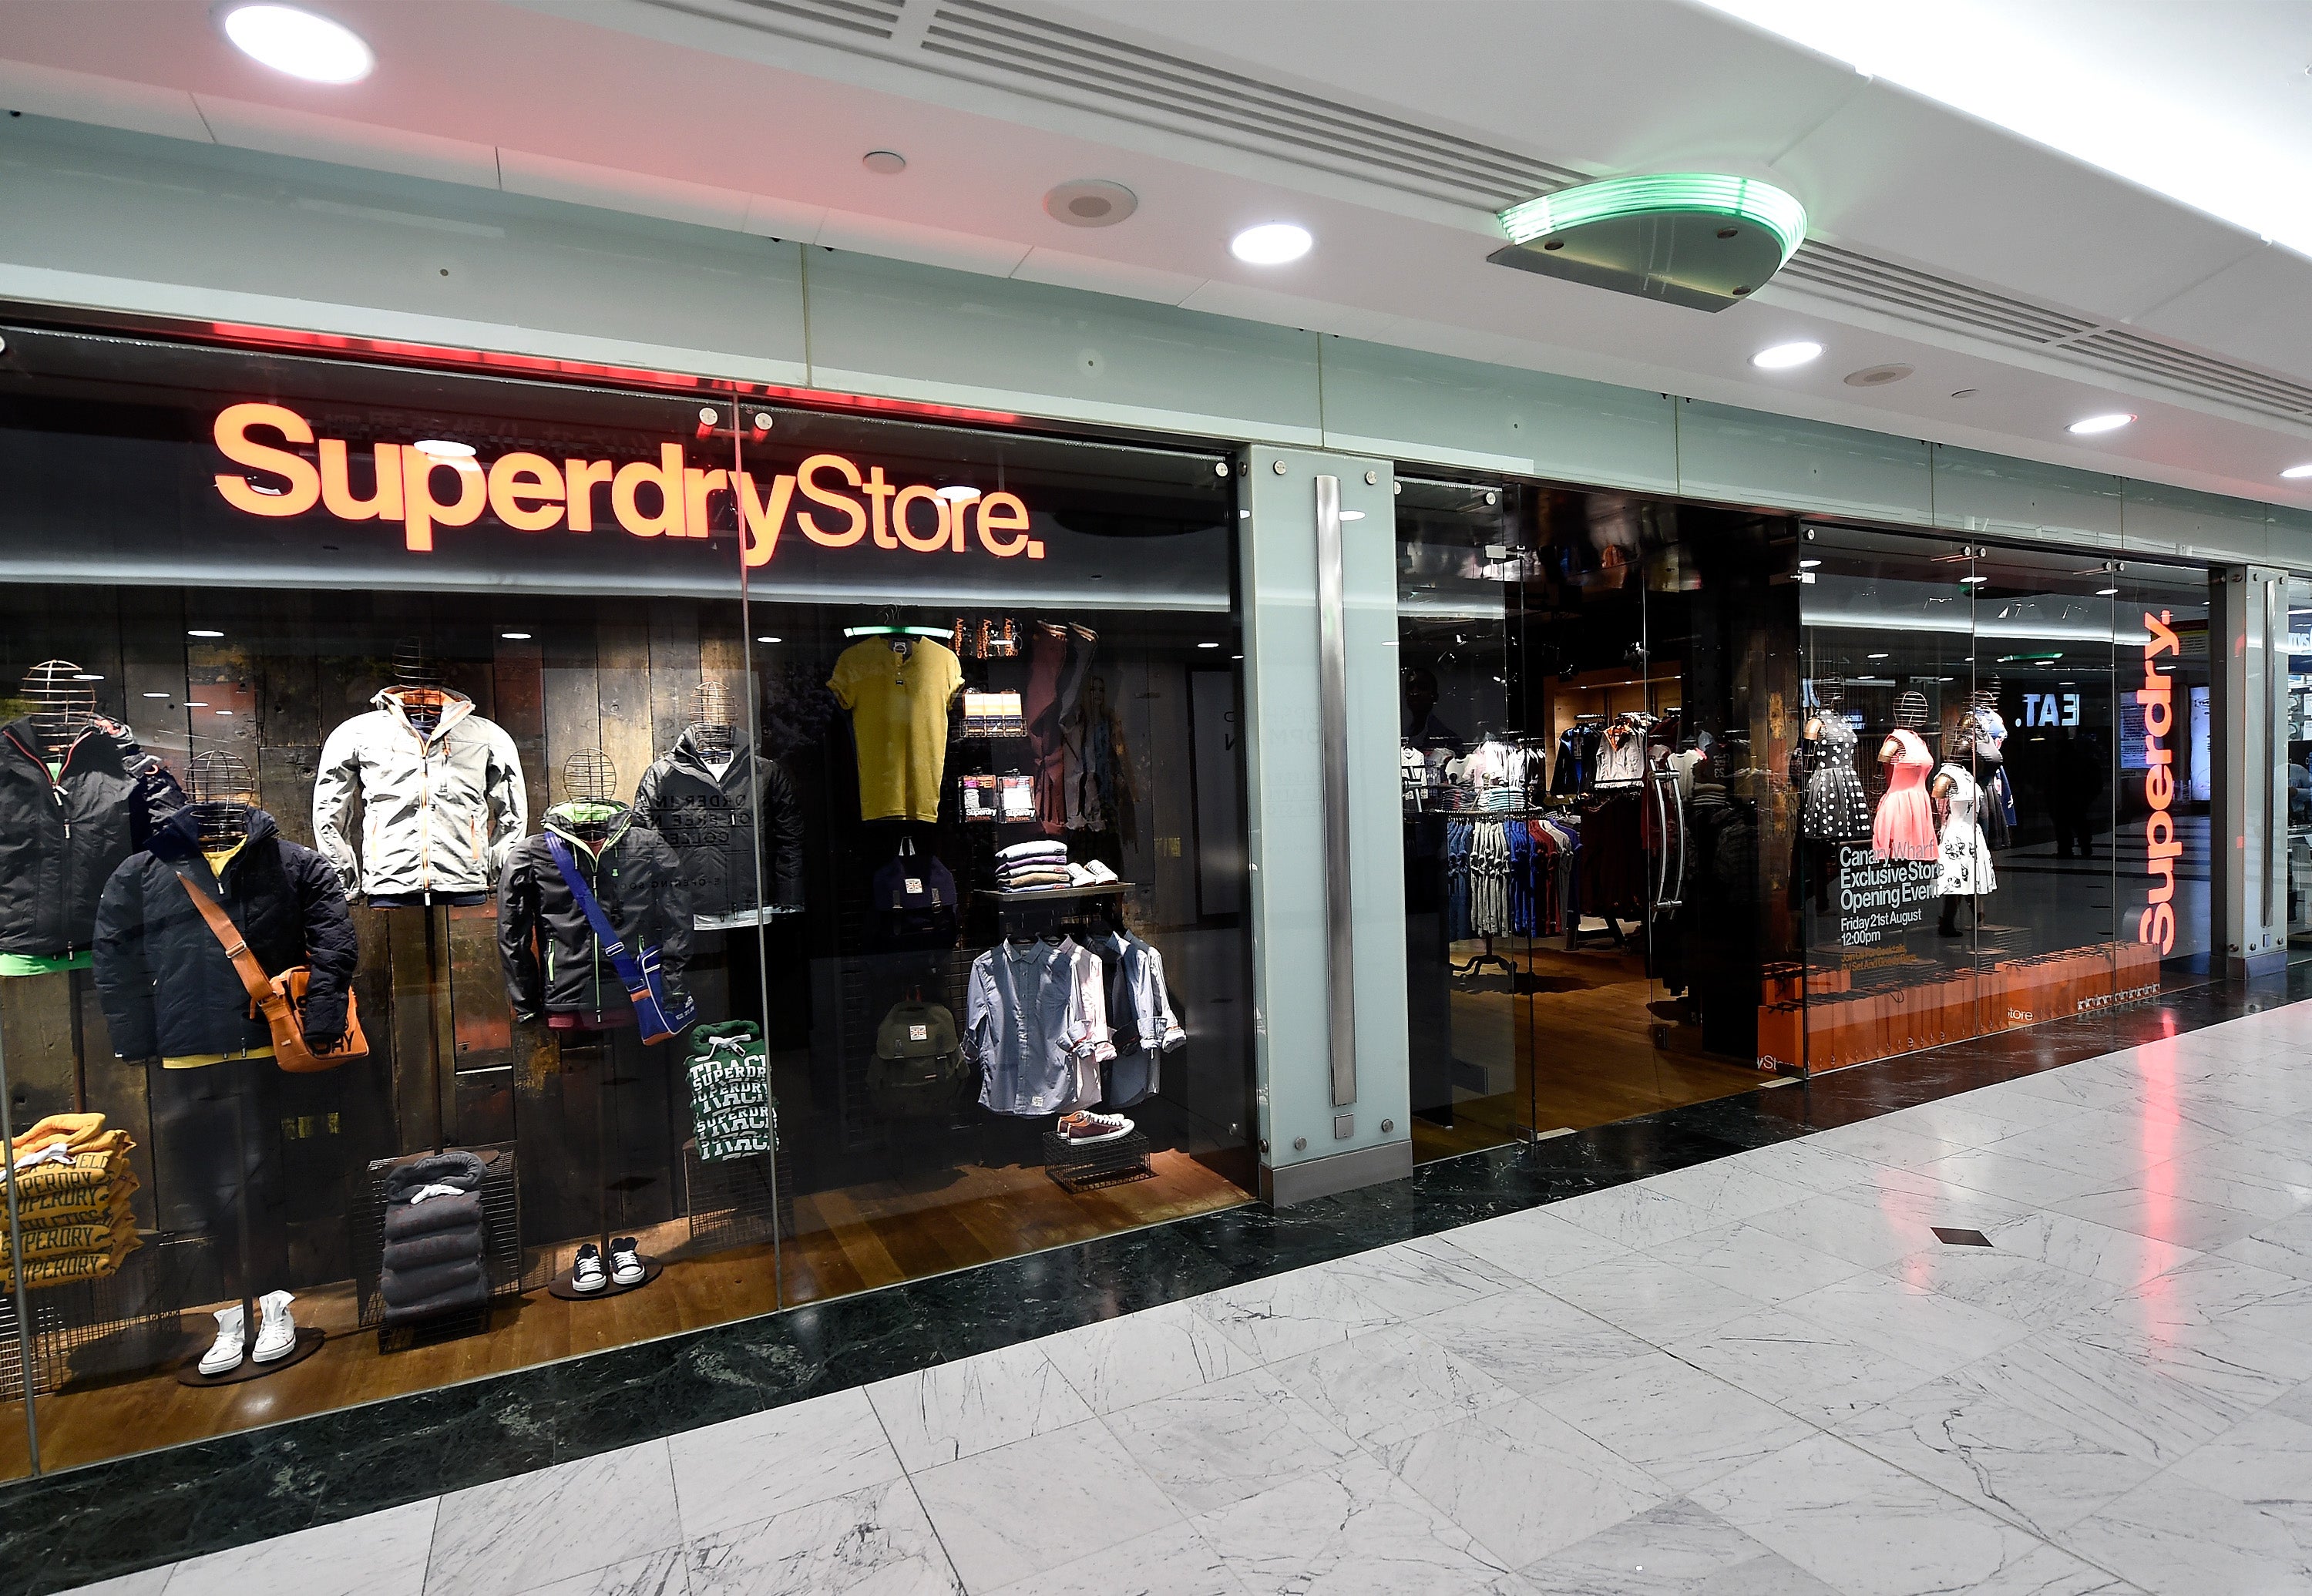 Popular clothing company Superdry could shut some 96 stores amid struggles  - Mirror Online